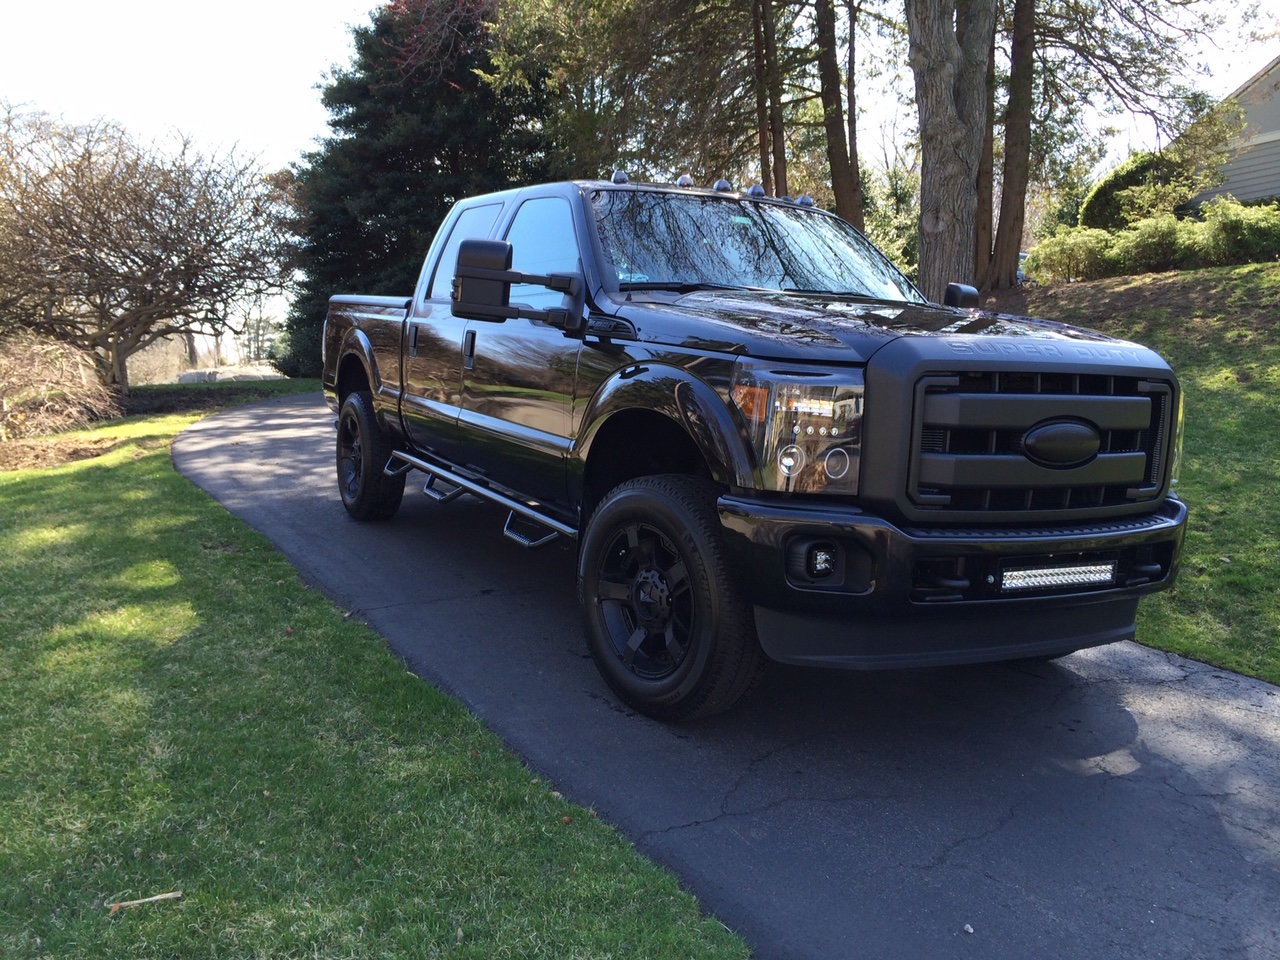 2014 Ford F-250 Super Duty - 2014 F250 Platinum ANZO Smoked LED Light Kit - Complete $600 OBO - Darien, CT 06820, United States